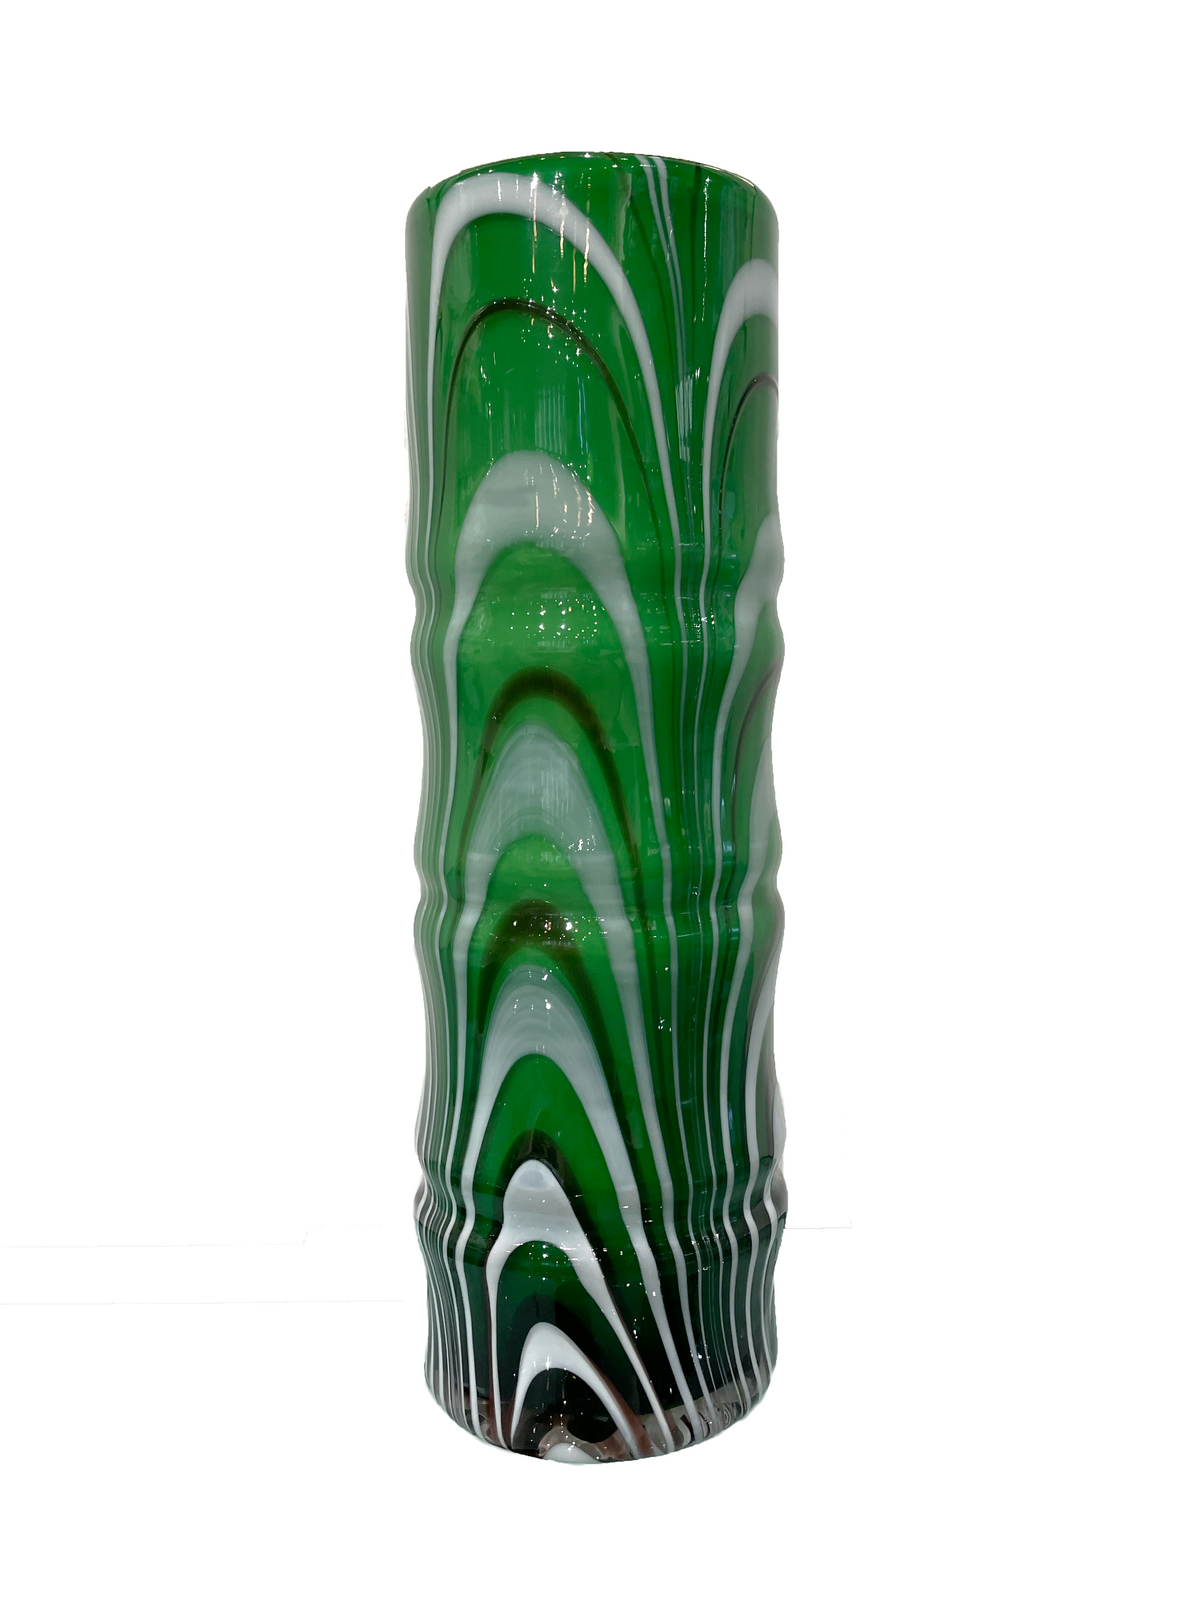 Large Marbled Green and White Vase